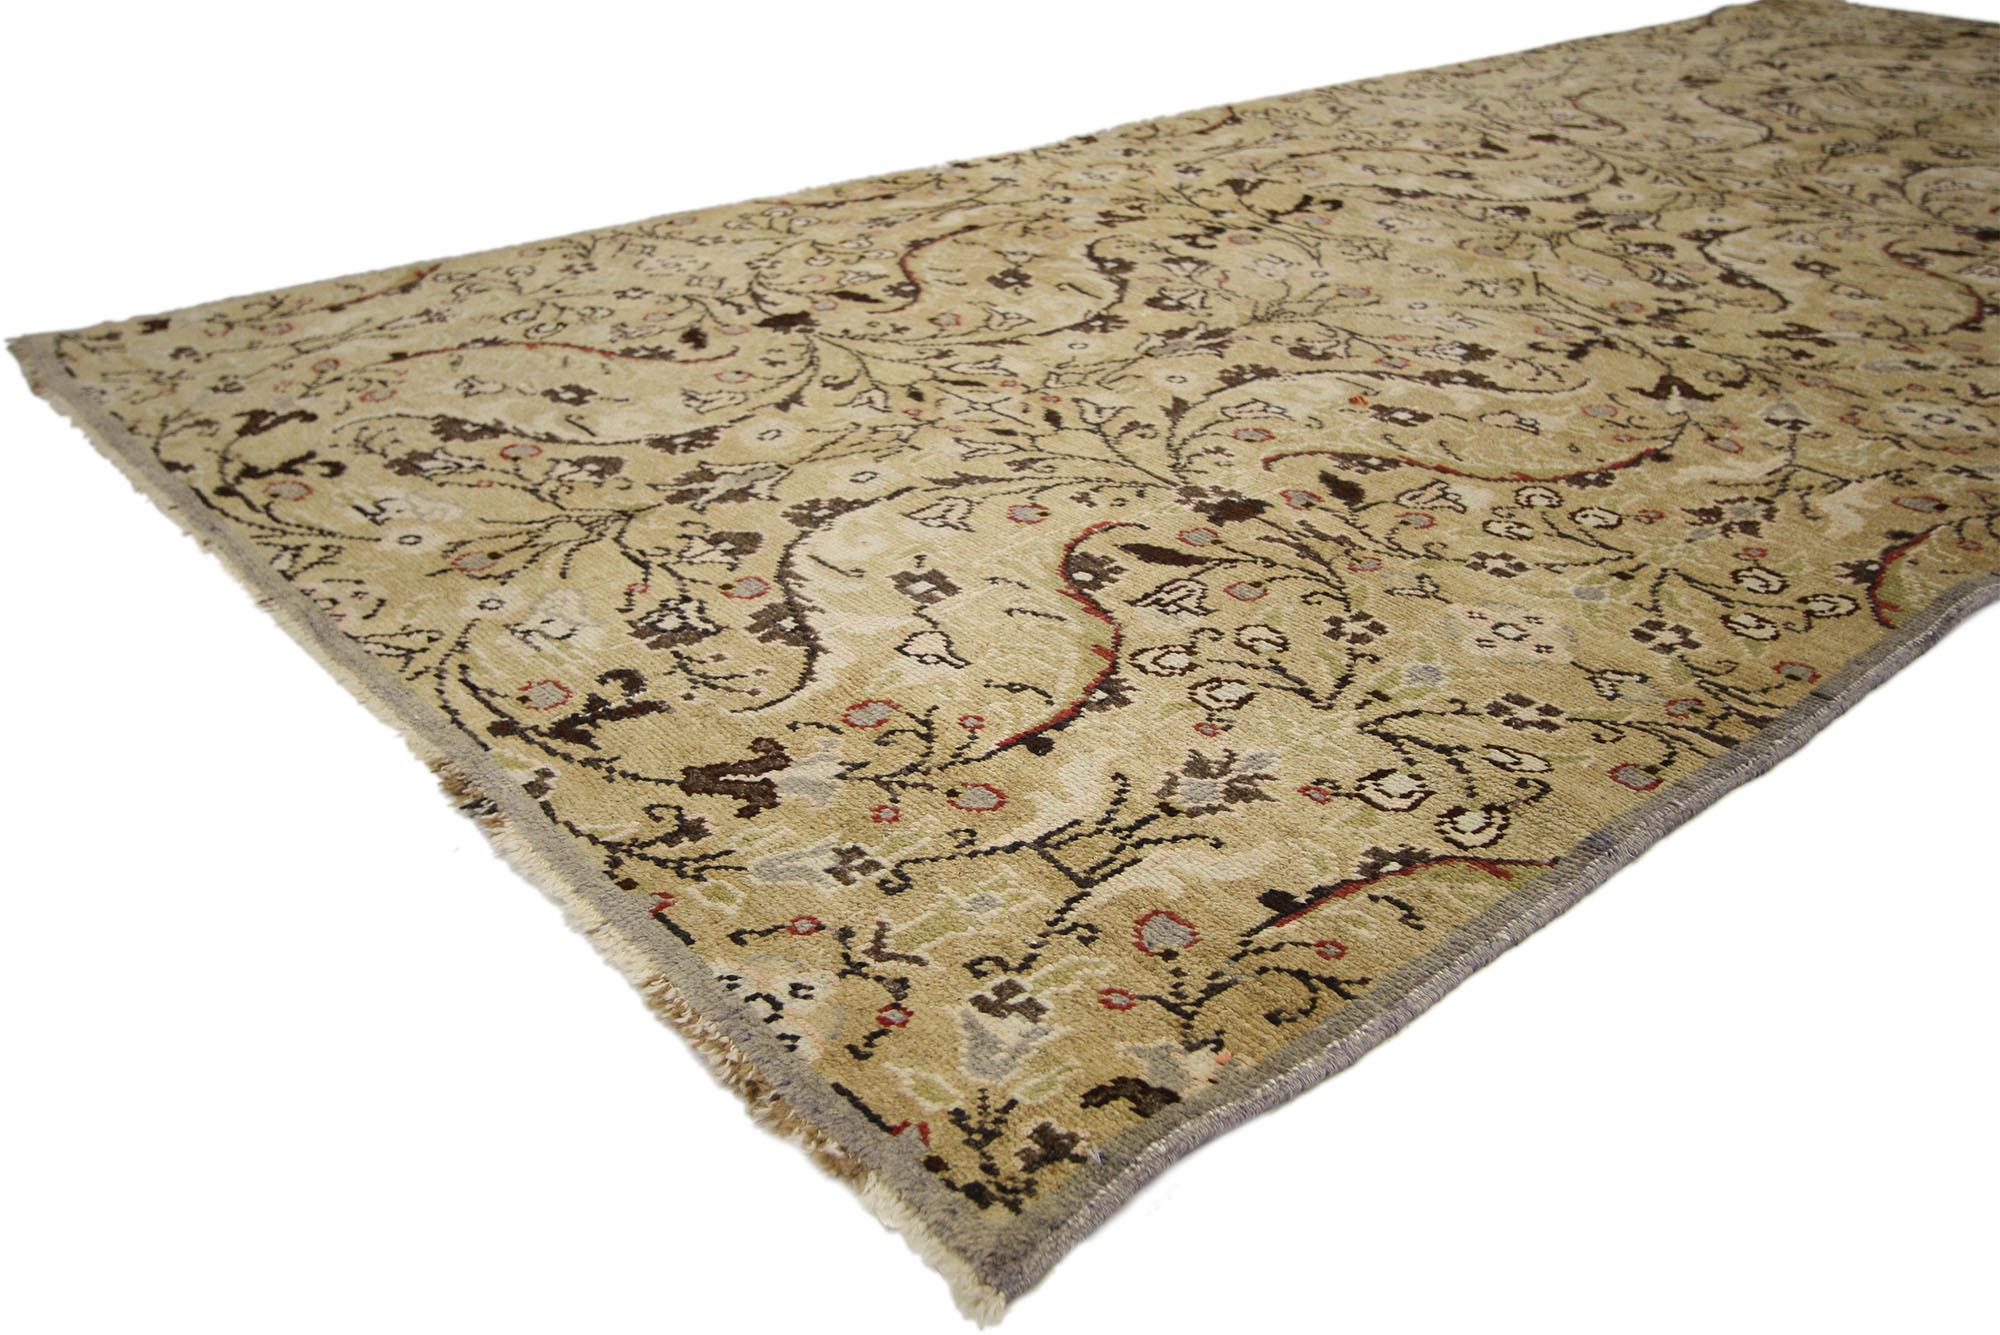 73754, vintage Turkish Oushak Hallway runner with Rustic Swedish farmhouse style. This hand knotted wool vintage Turkish Oushak runner with rustic Swedish Farmhouse style is characterized by subtle tones and traditional elegance. The tan field and